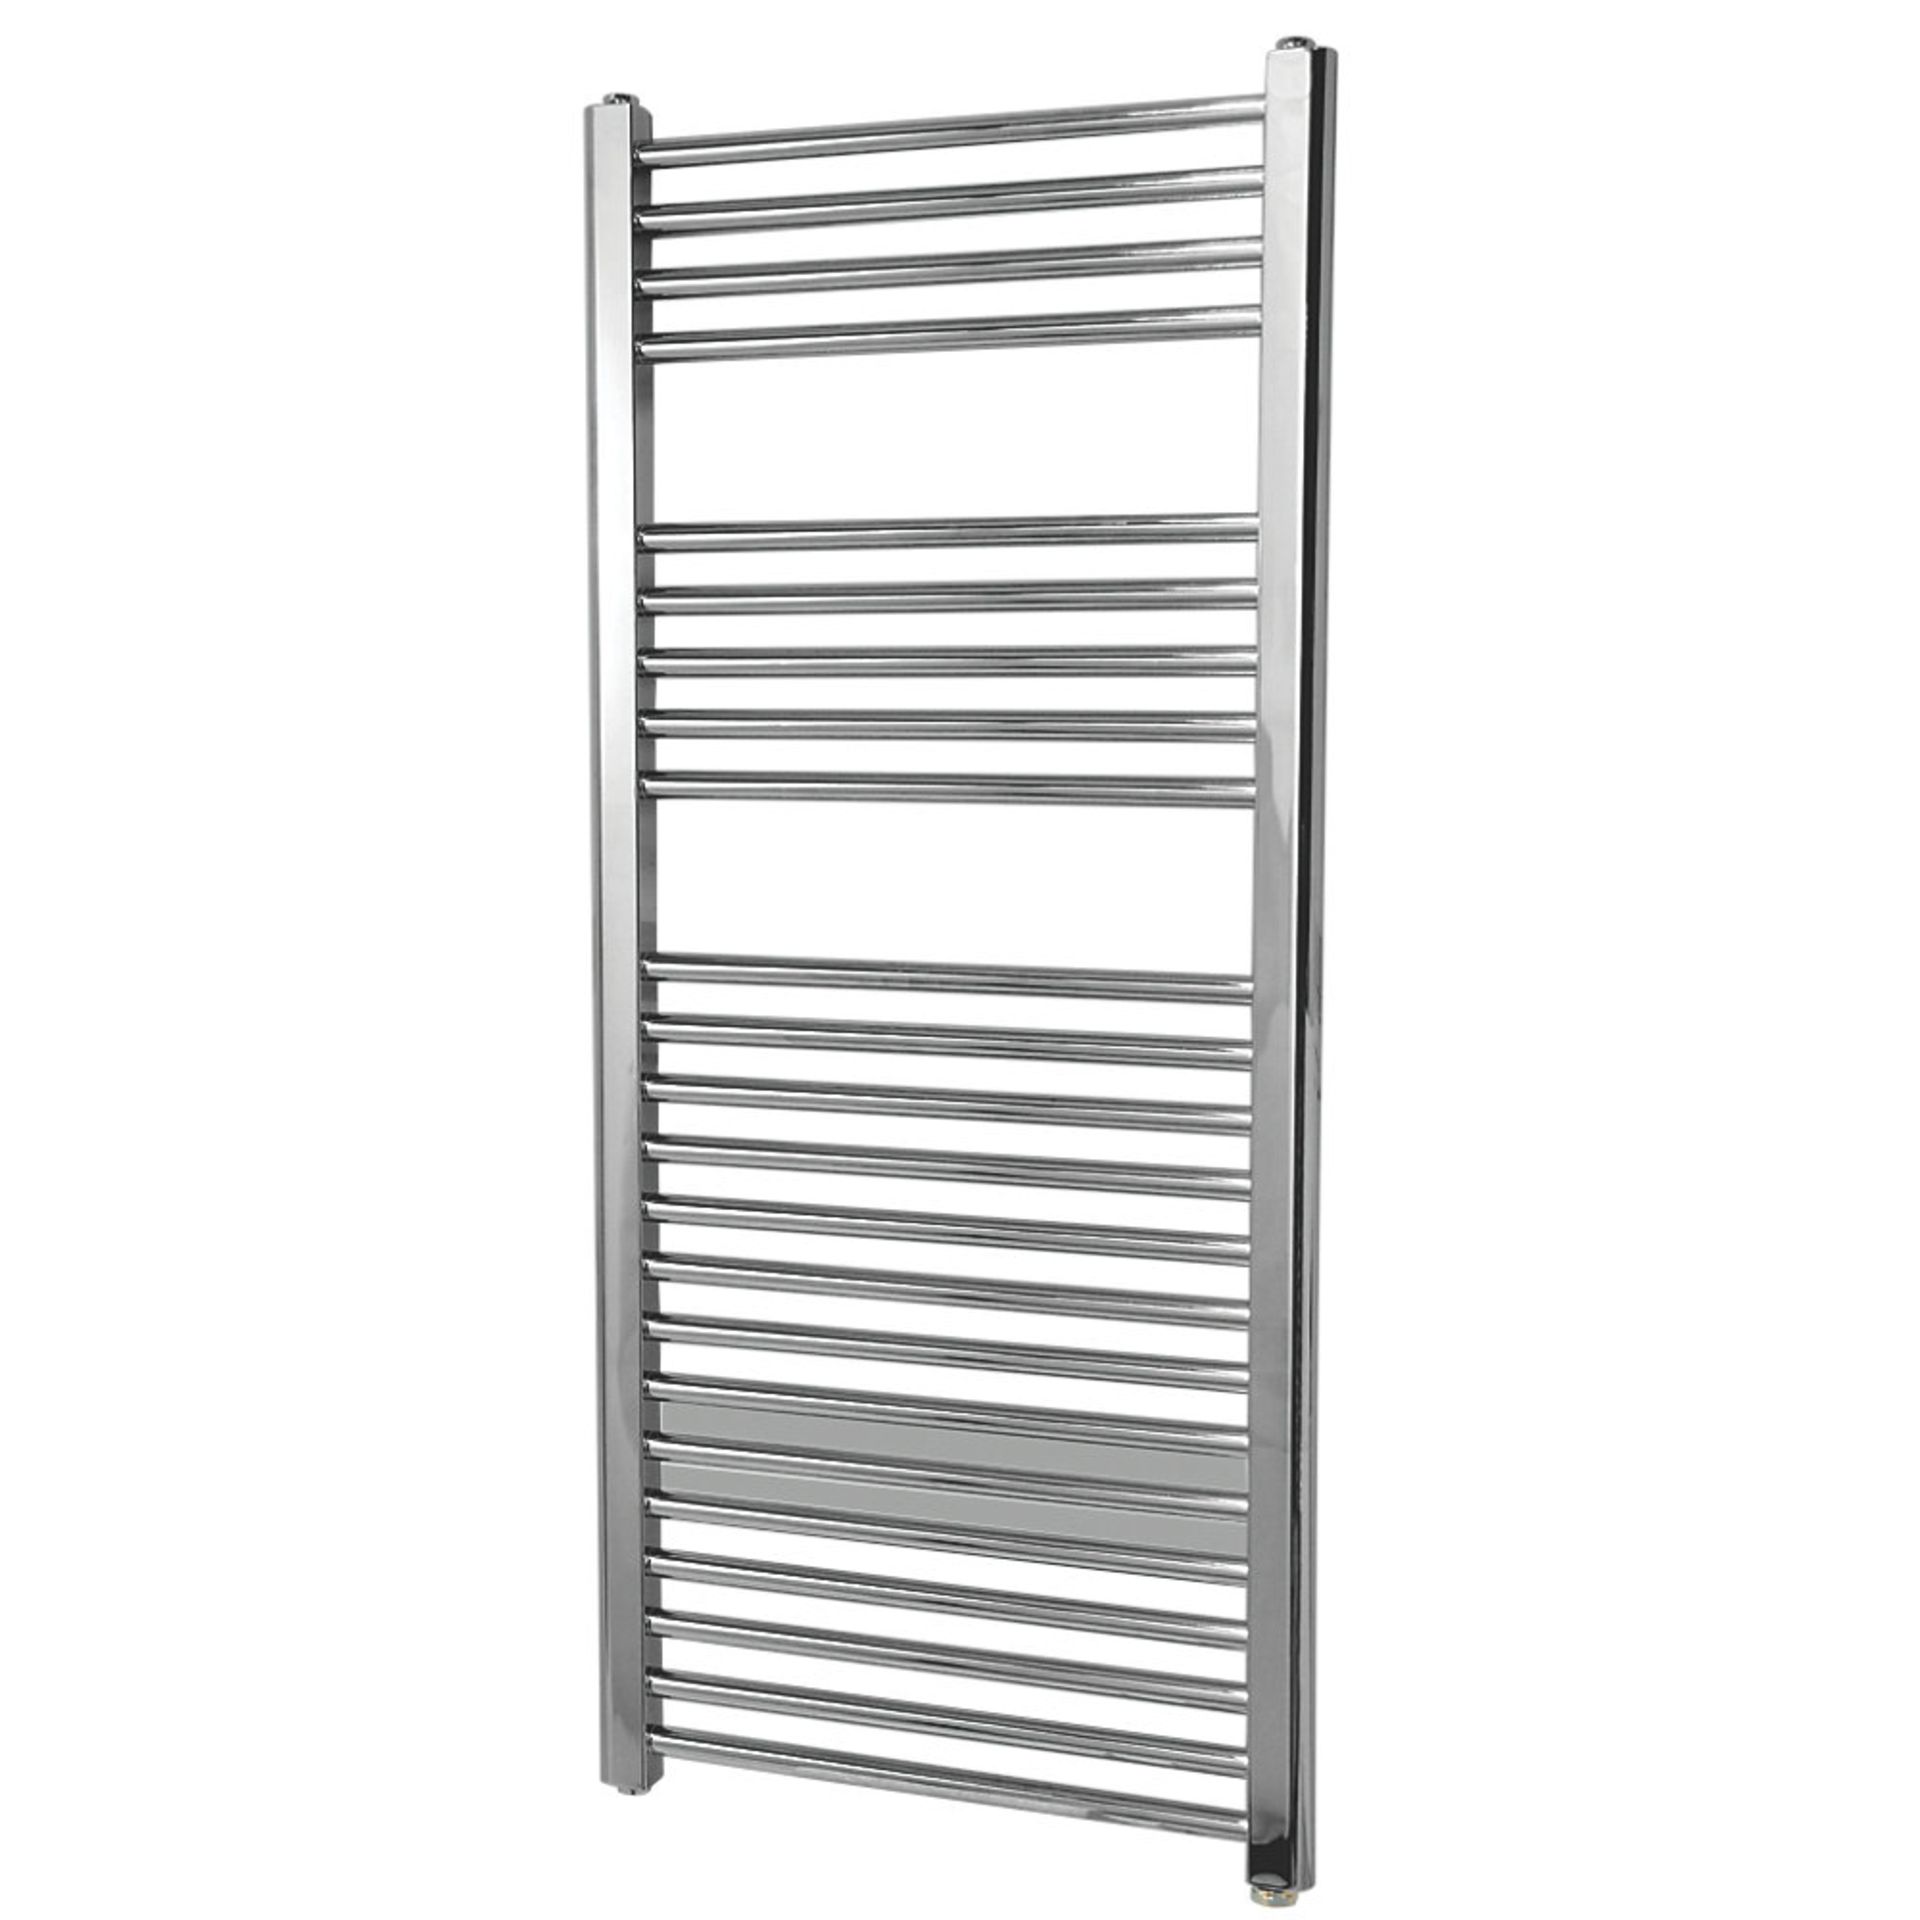 (CR19) 1100x500mm FLOMASTA FLAT ELECTRIC TOWEL RADIATOR CHROME. Electrical installation only. E... - Image 2 of 2